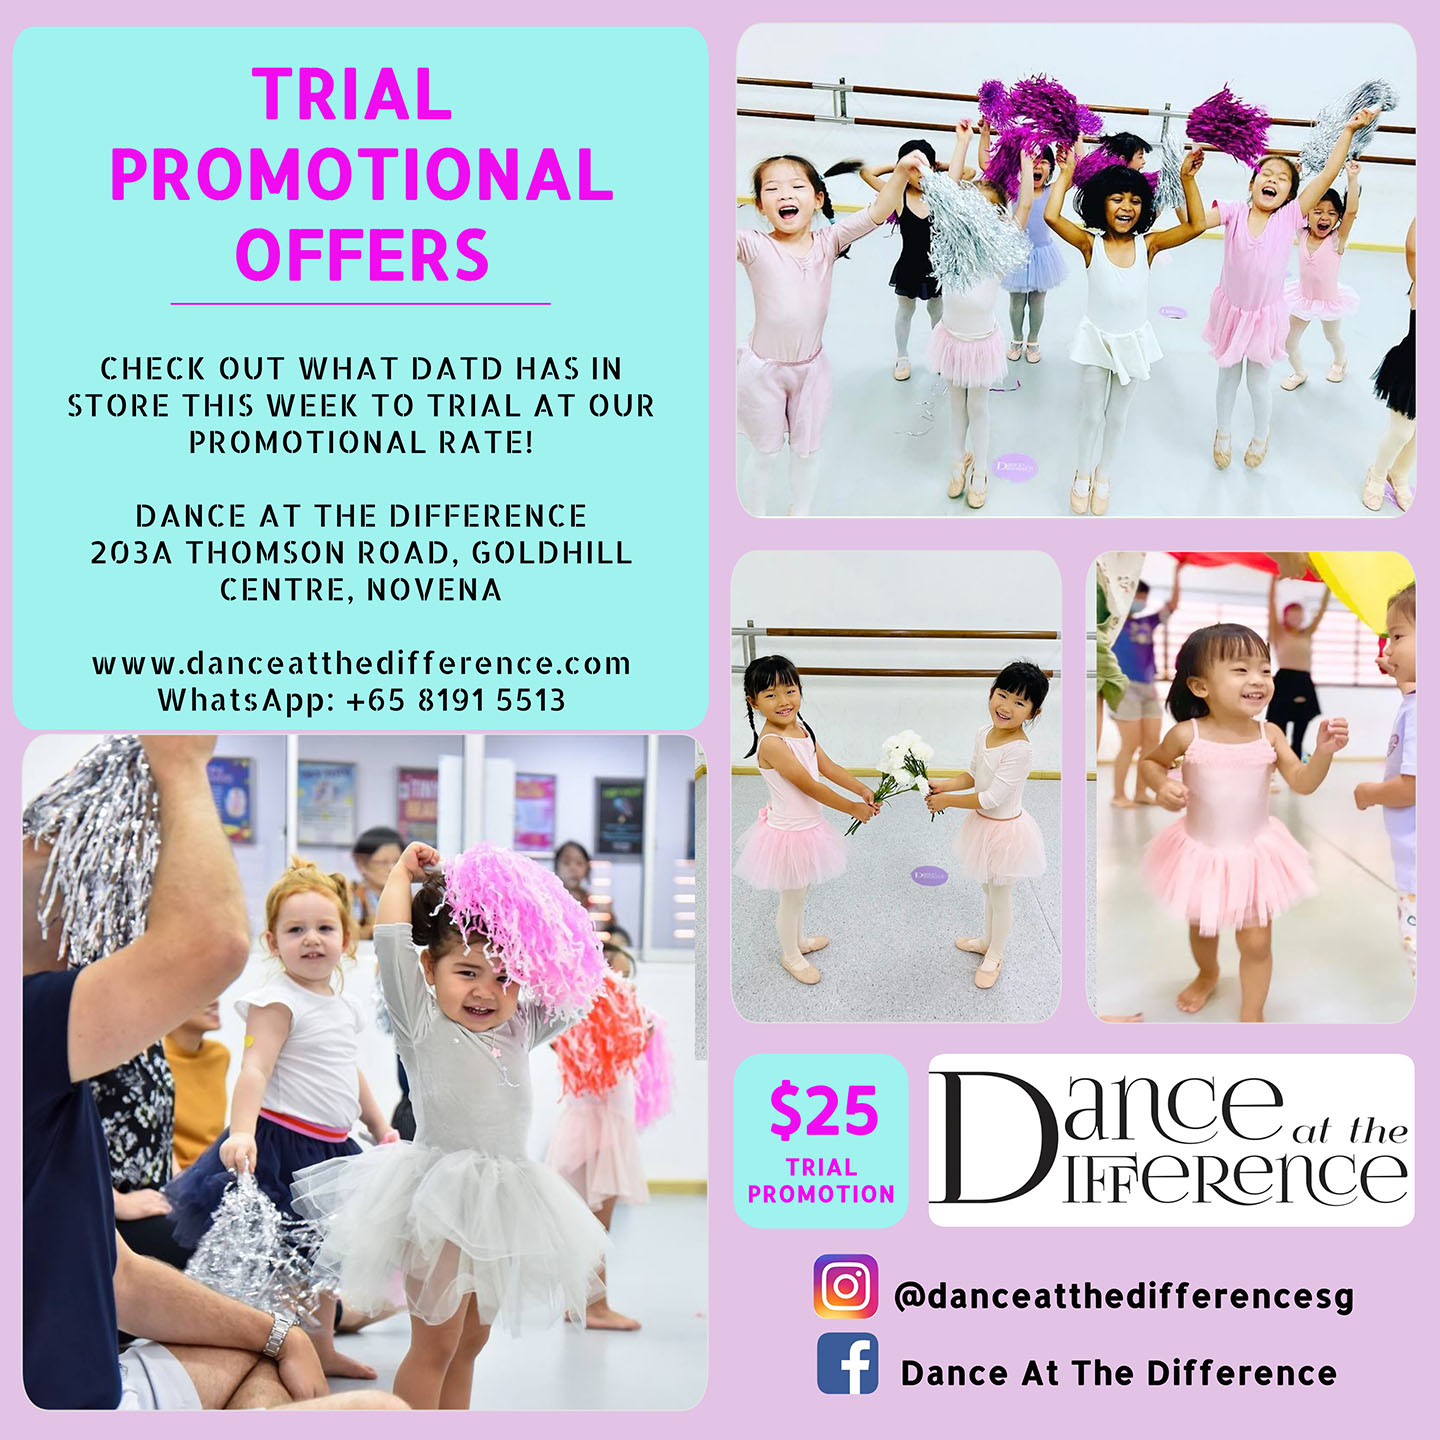 Trial promotional offers